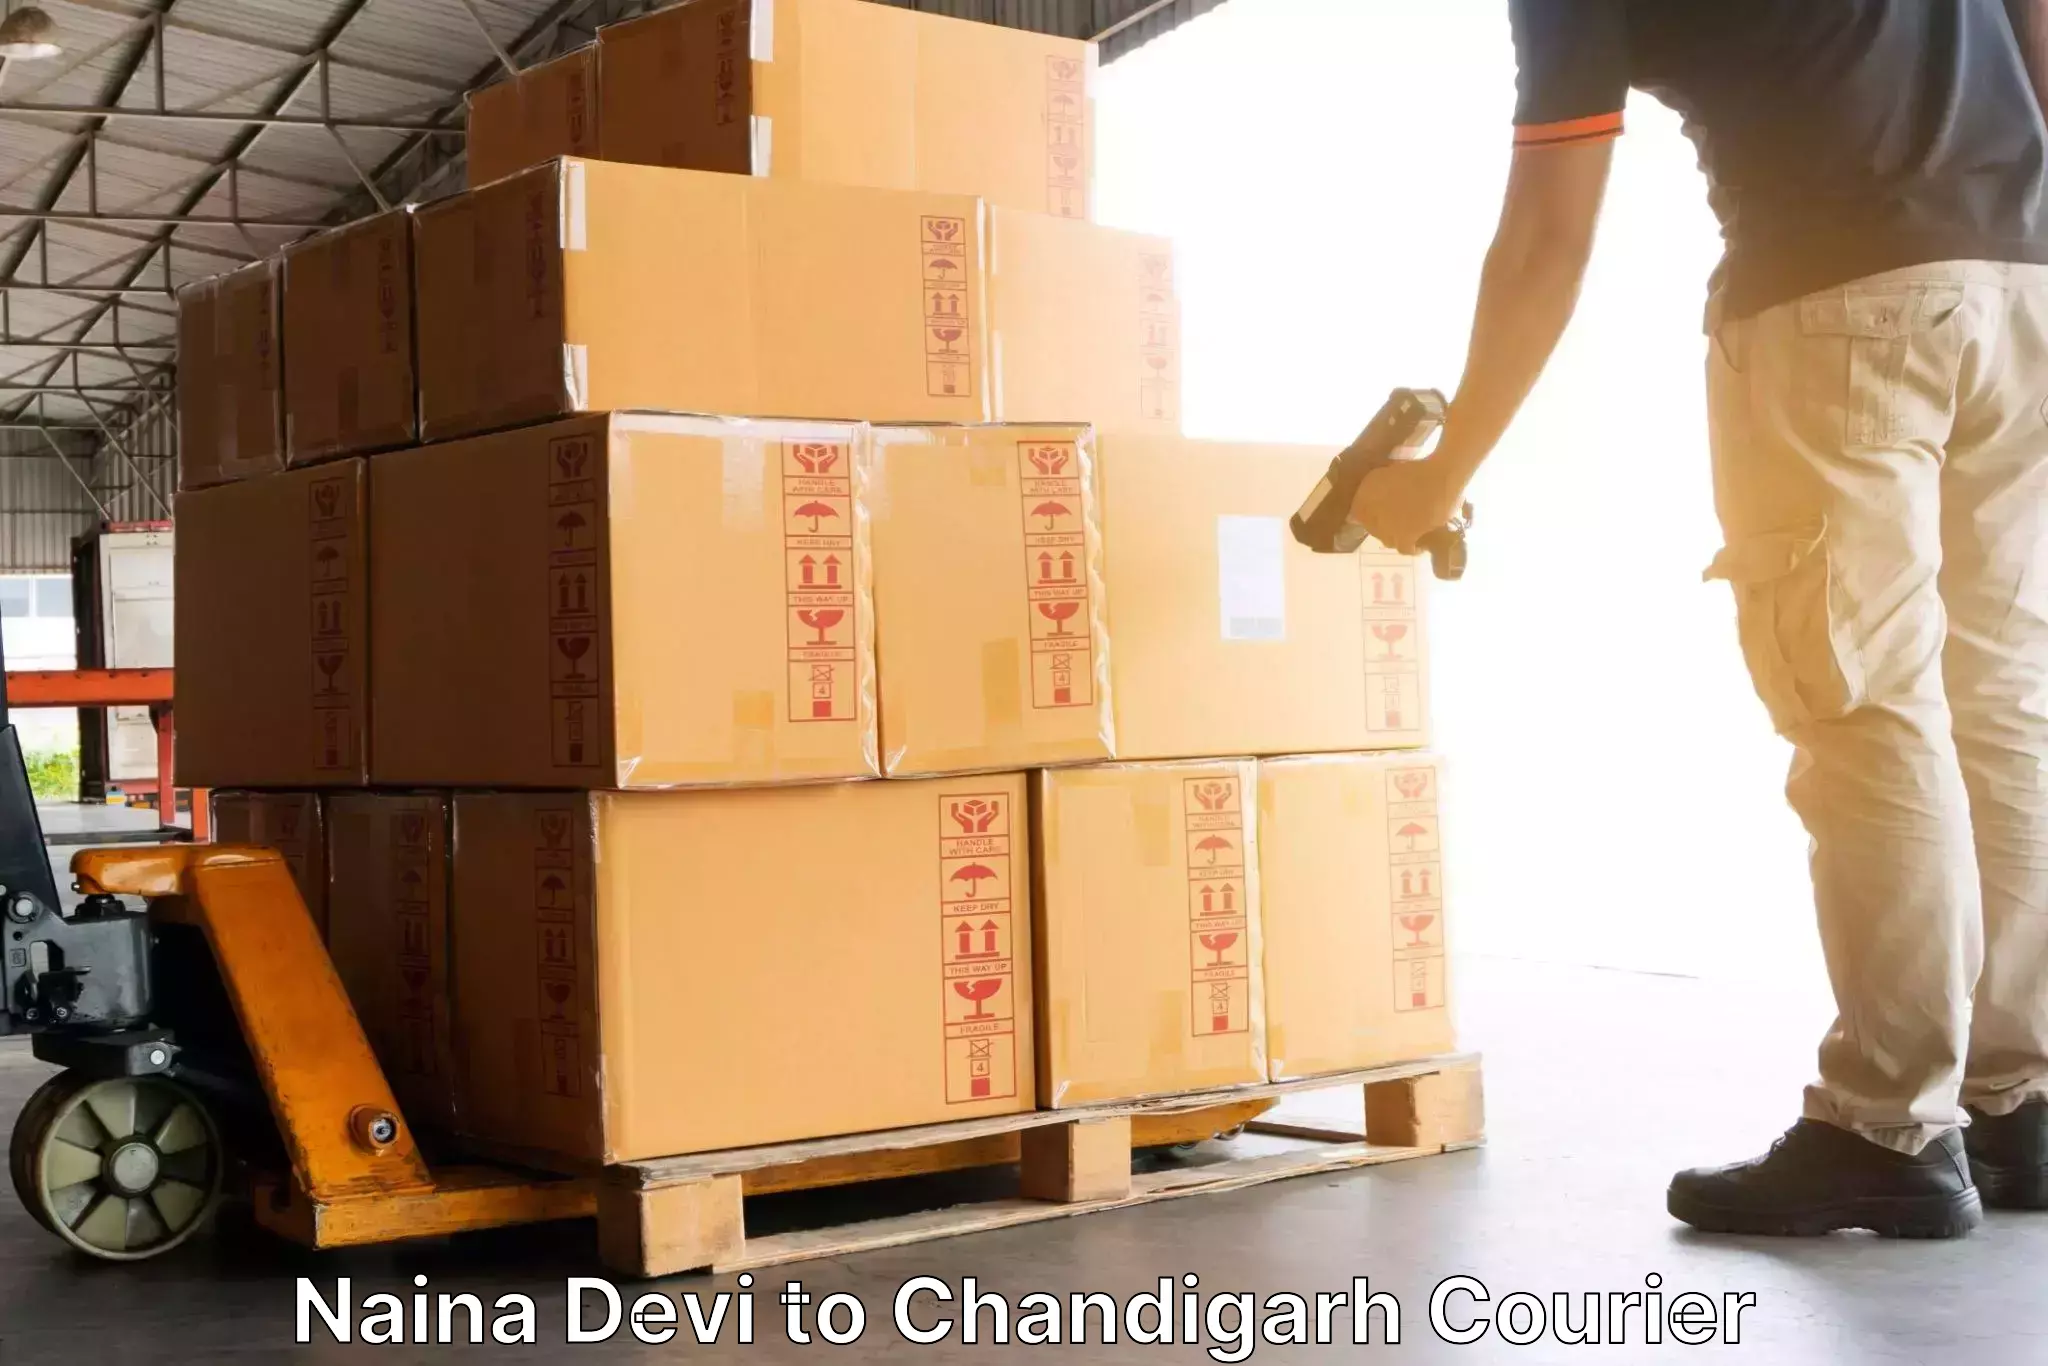 Efficient shipping operations Naina Devi to Chandigarh